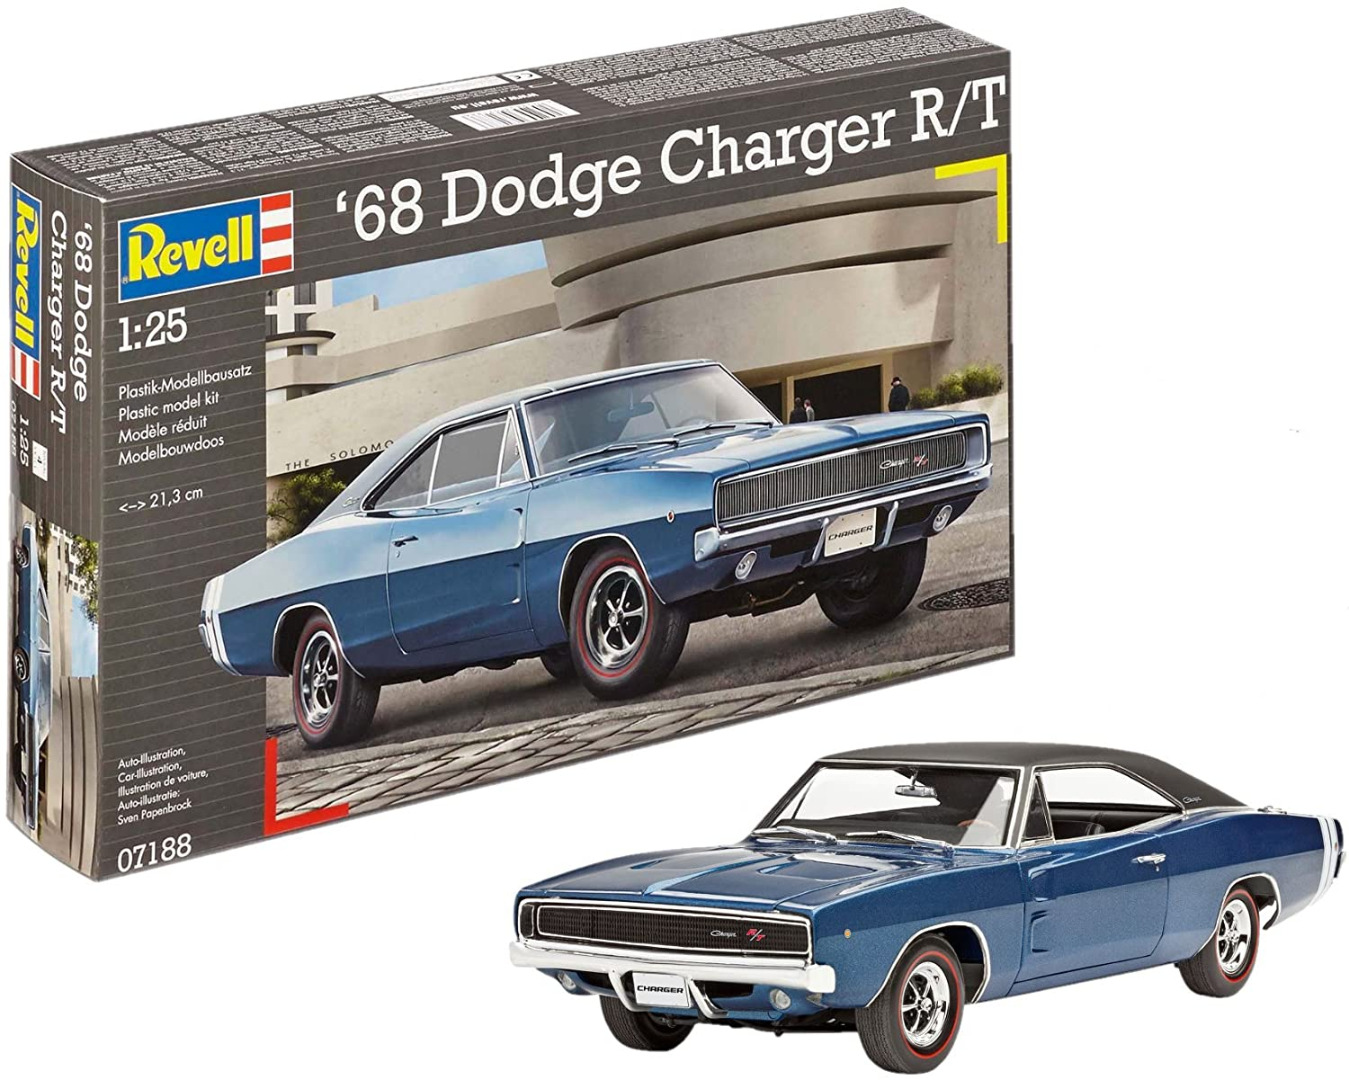 Revell Model Kit '68 Dodge Charger R/T Scale 1:25